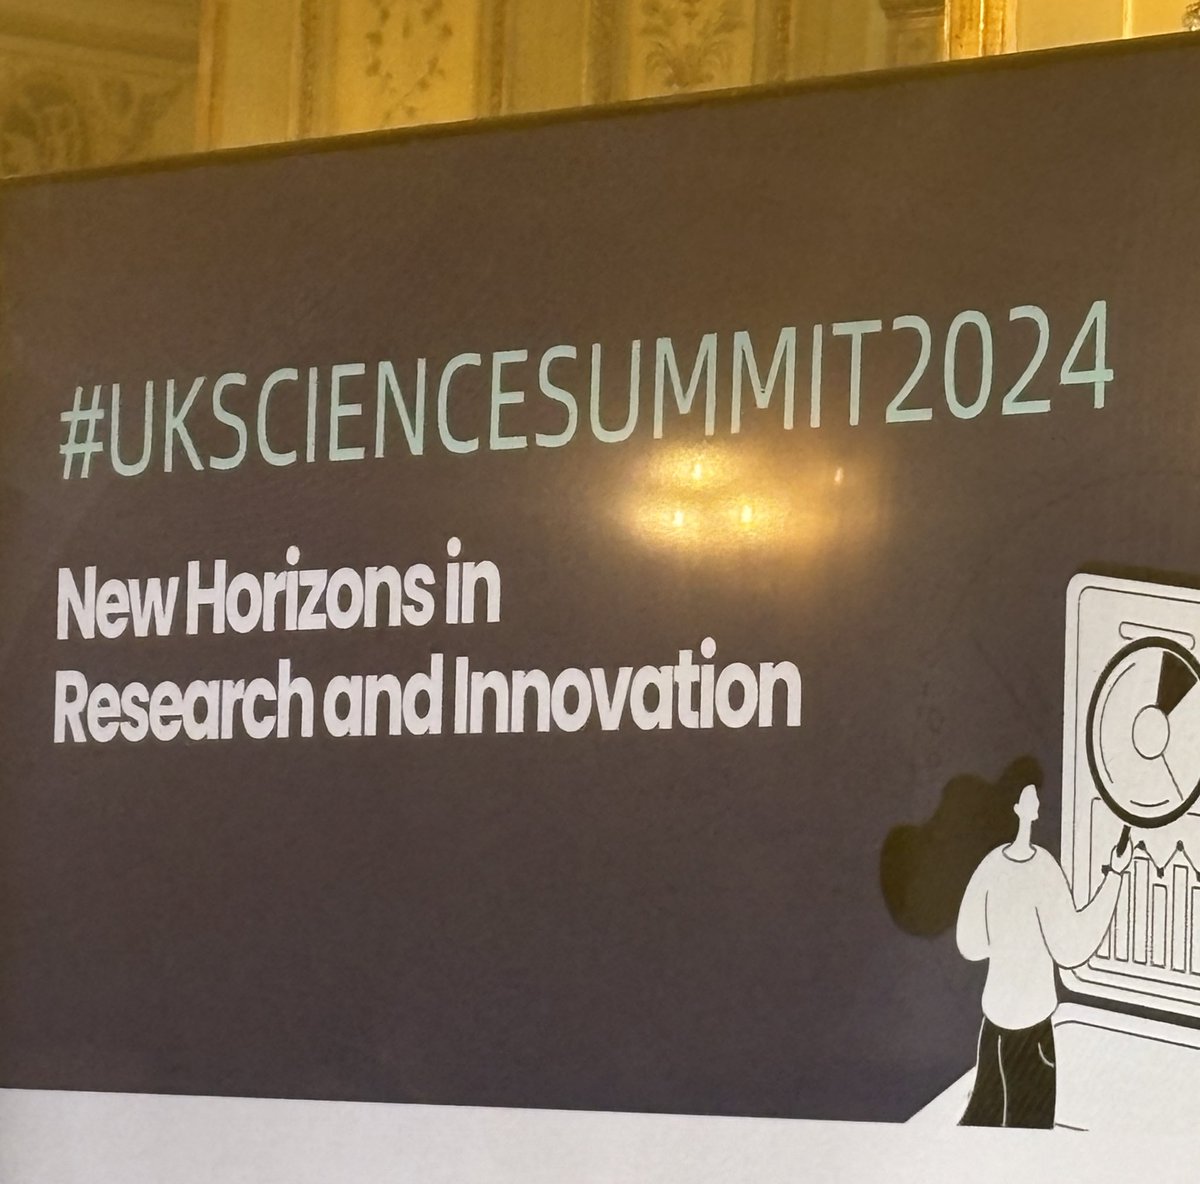 Ready to participate in #UKScienceSummit in Brussels in a busy week for research and innovation in Brussels with @UKMisBrussels @_UKRO_ and colleagues from @WalesInEurope